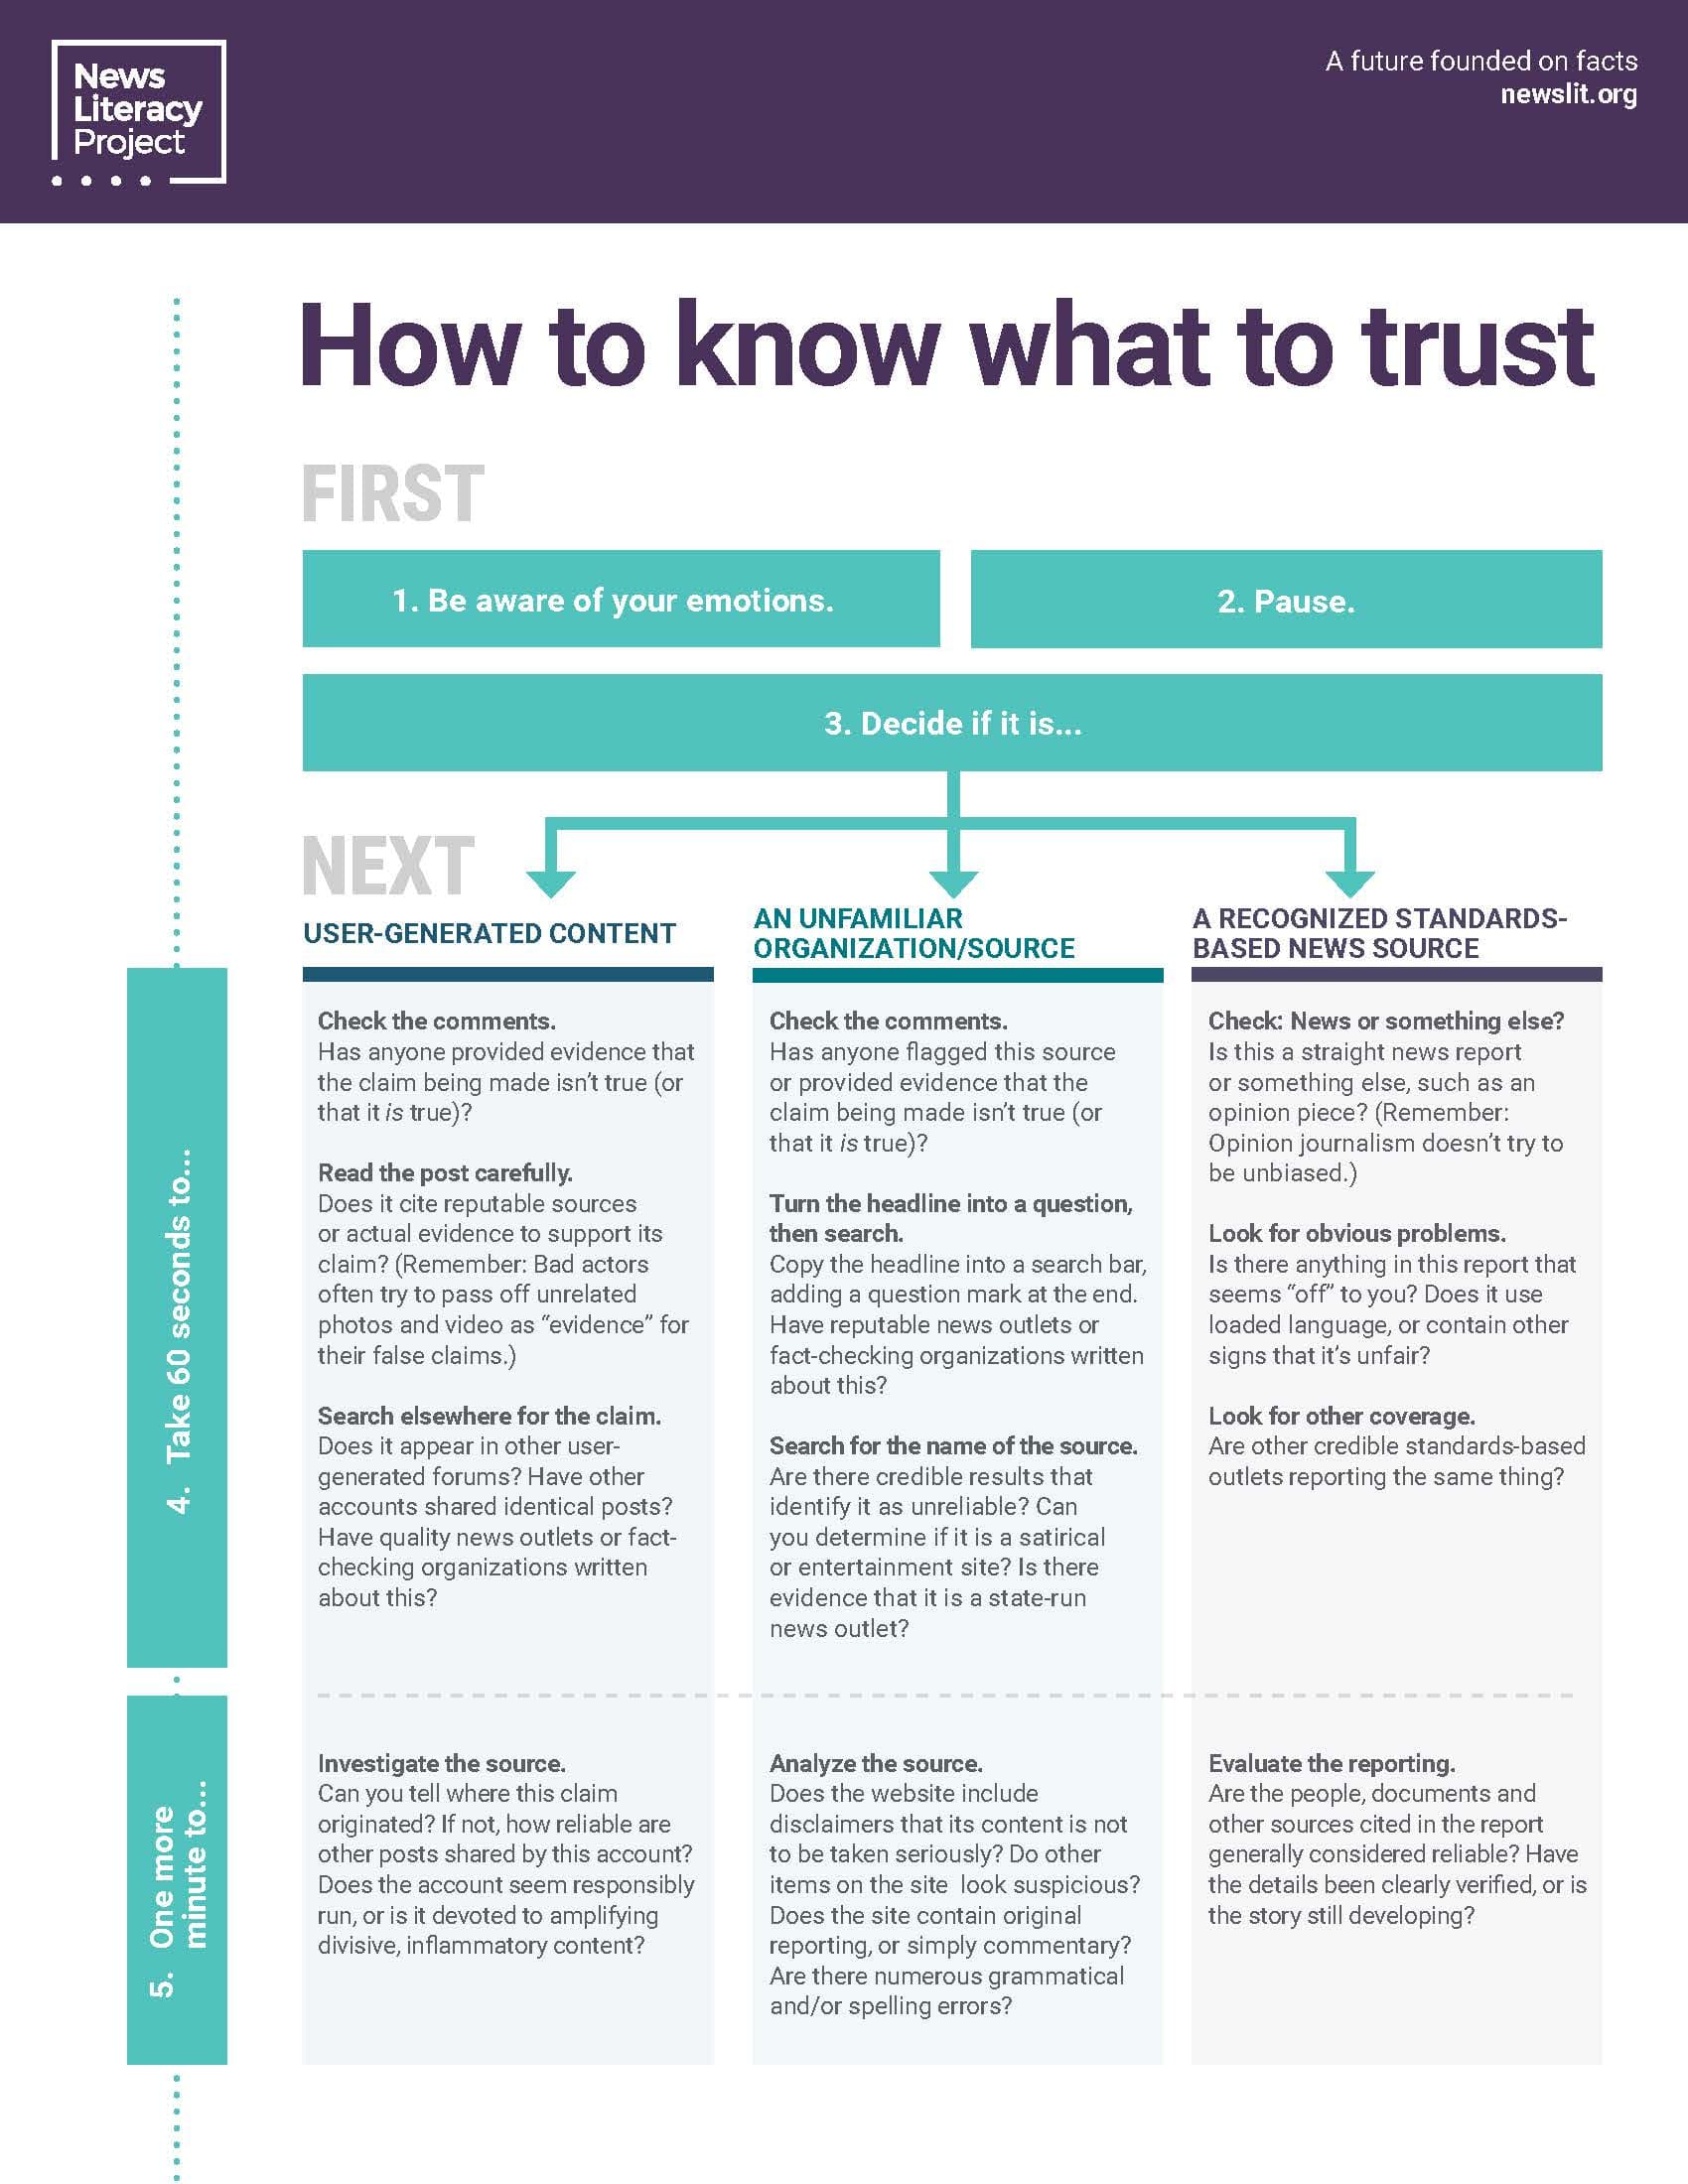 how to know what to trust article, part 1